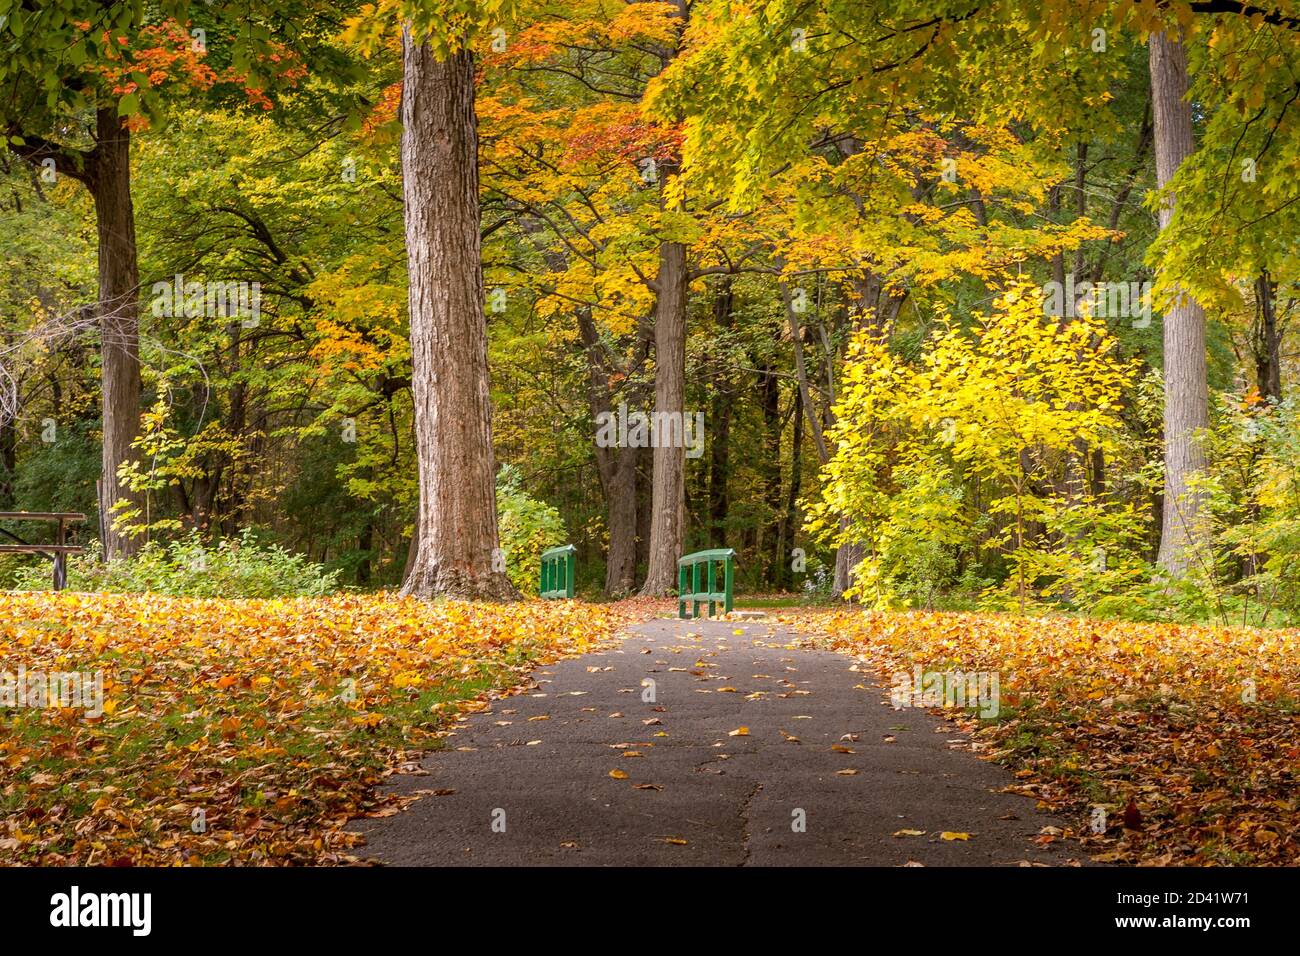 Footpath surrounded by maple trees in fall colors. The ground is filled with fallen leaves. Stock Photo